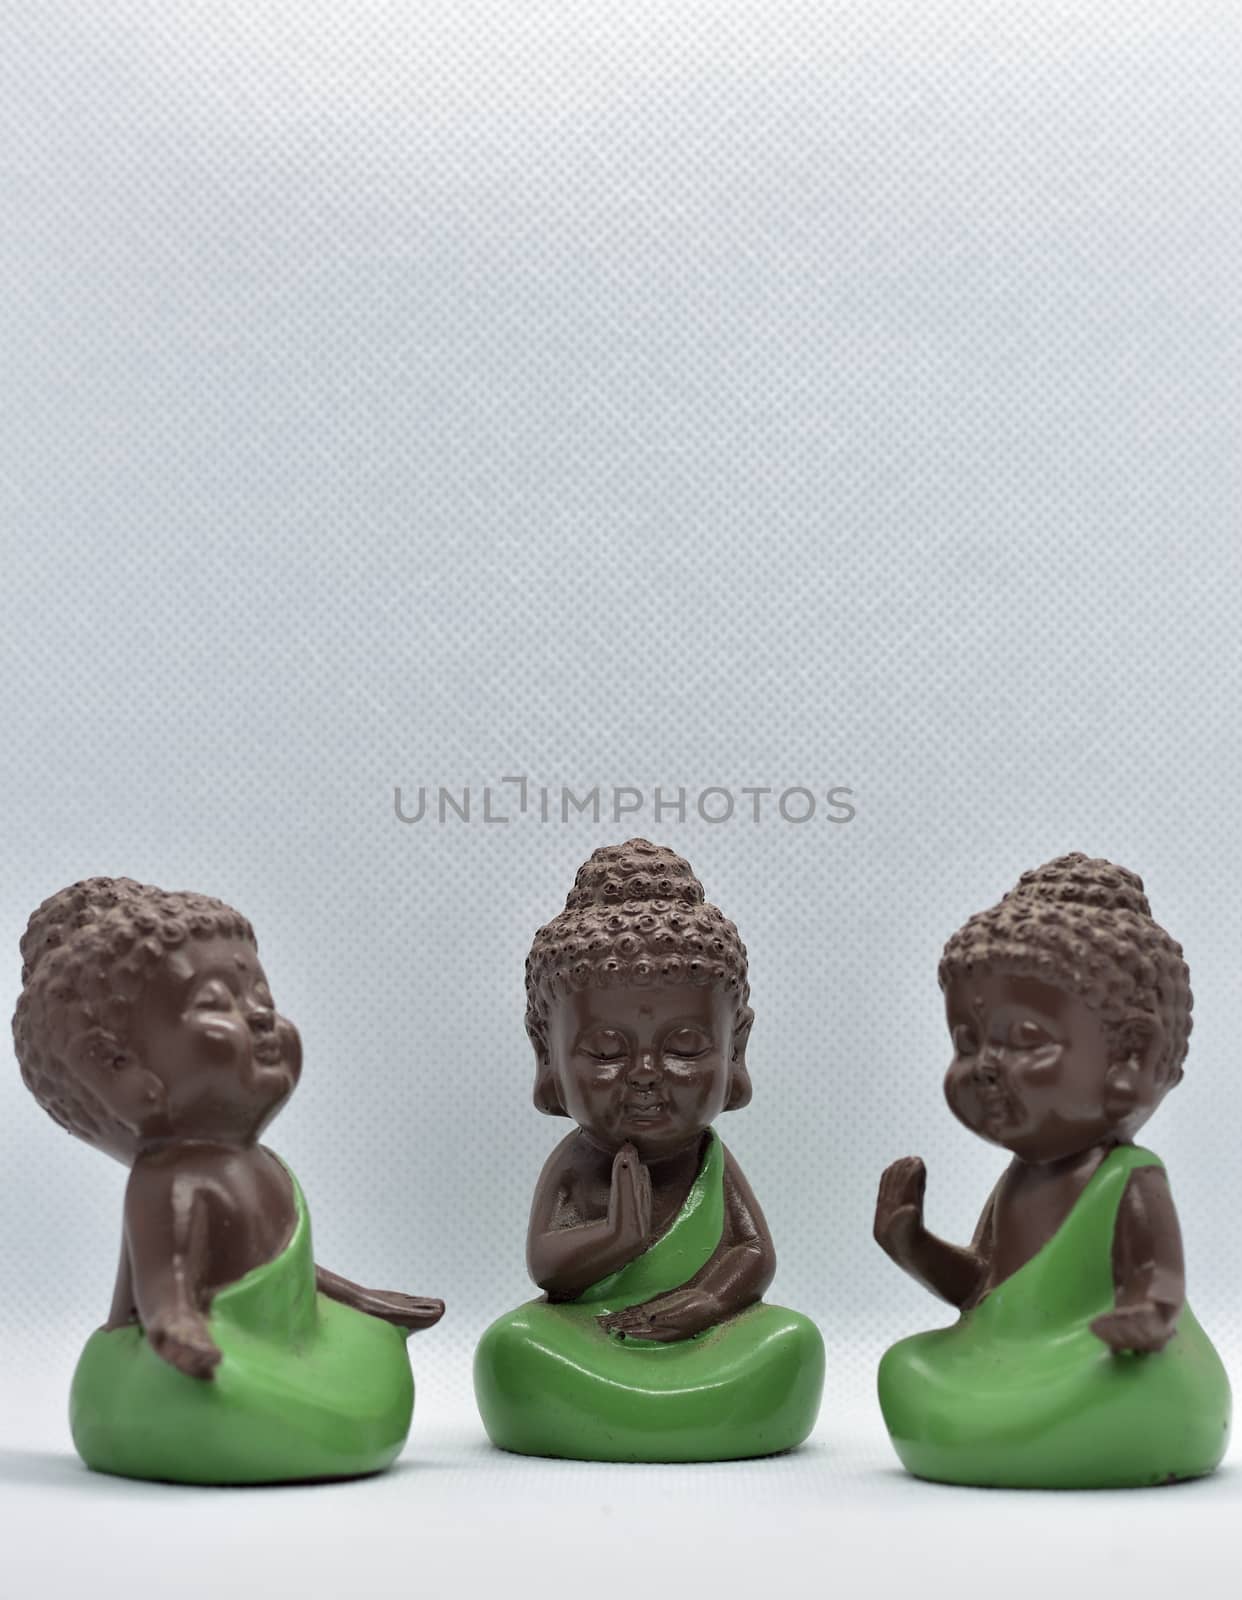 Three cute monk figures attract attention and also meaningful with modern simplicity.